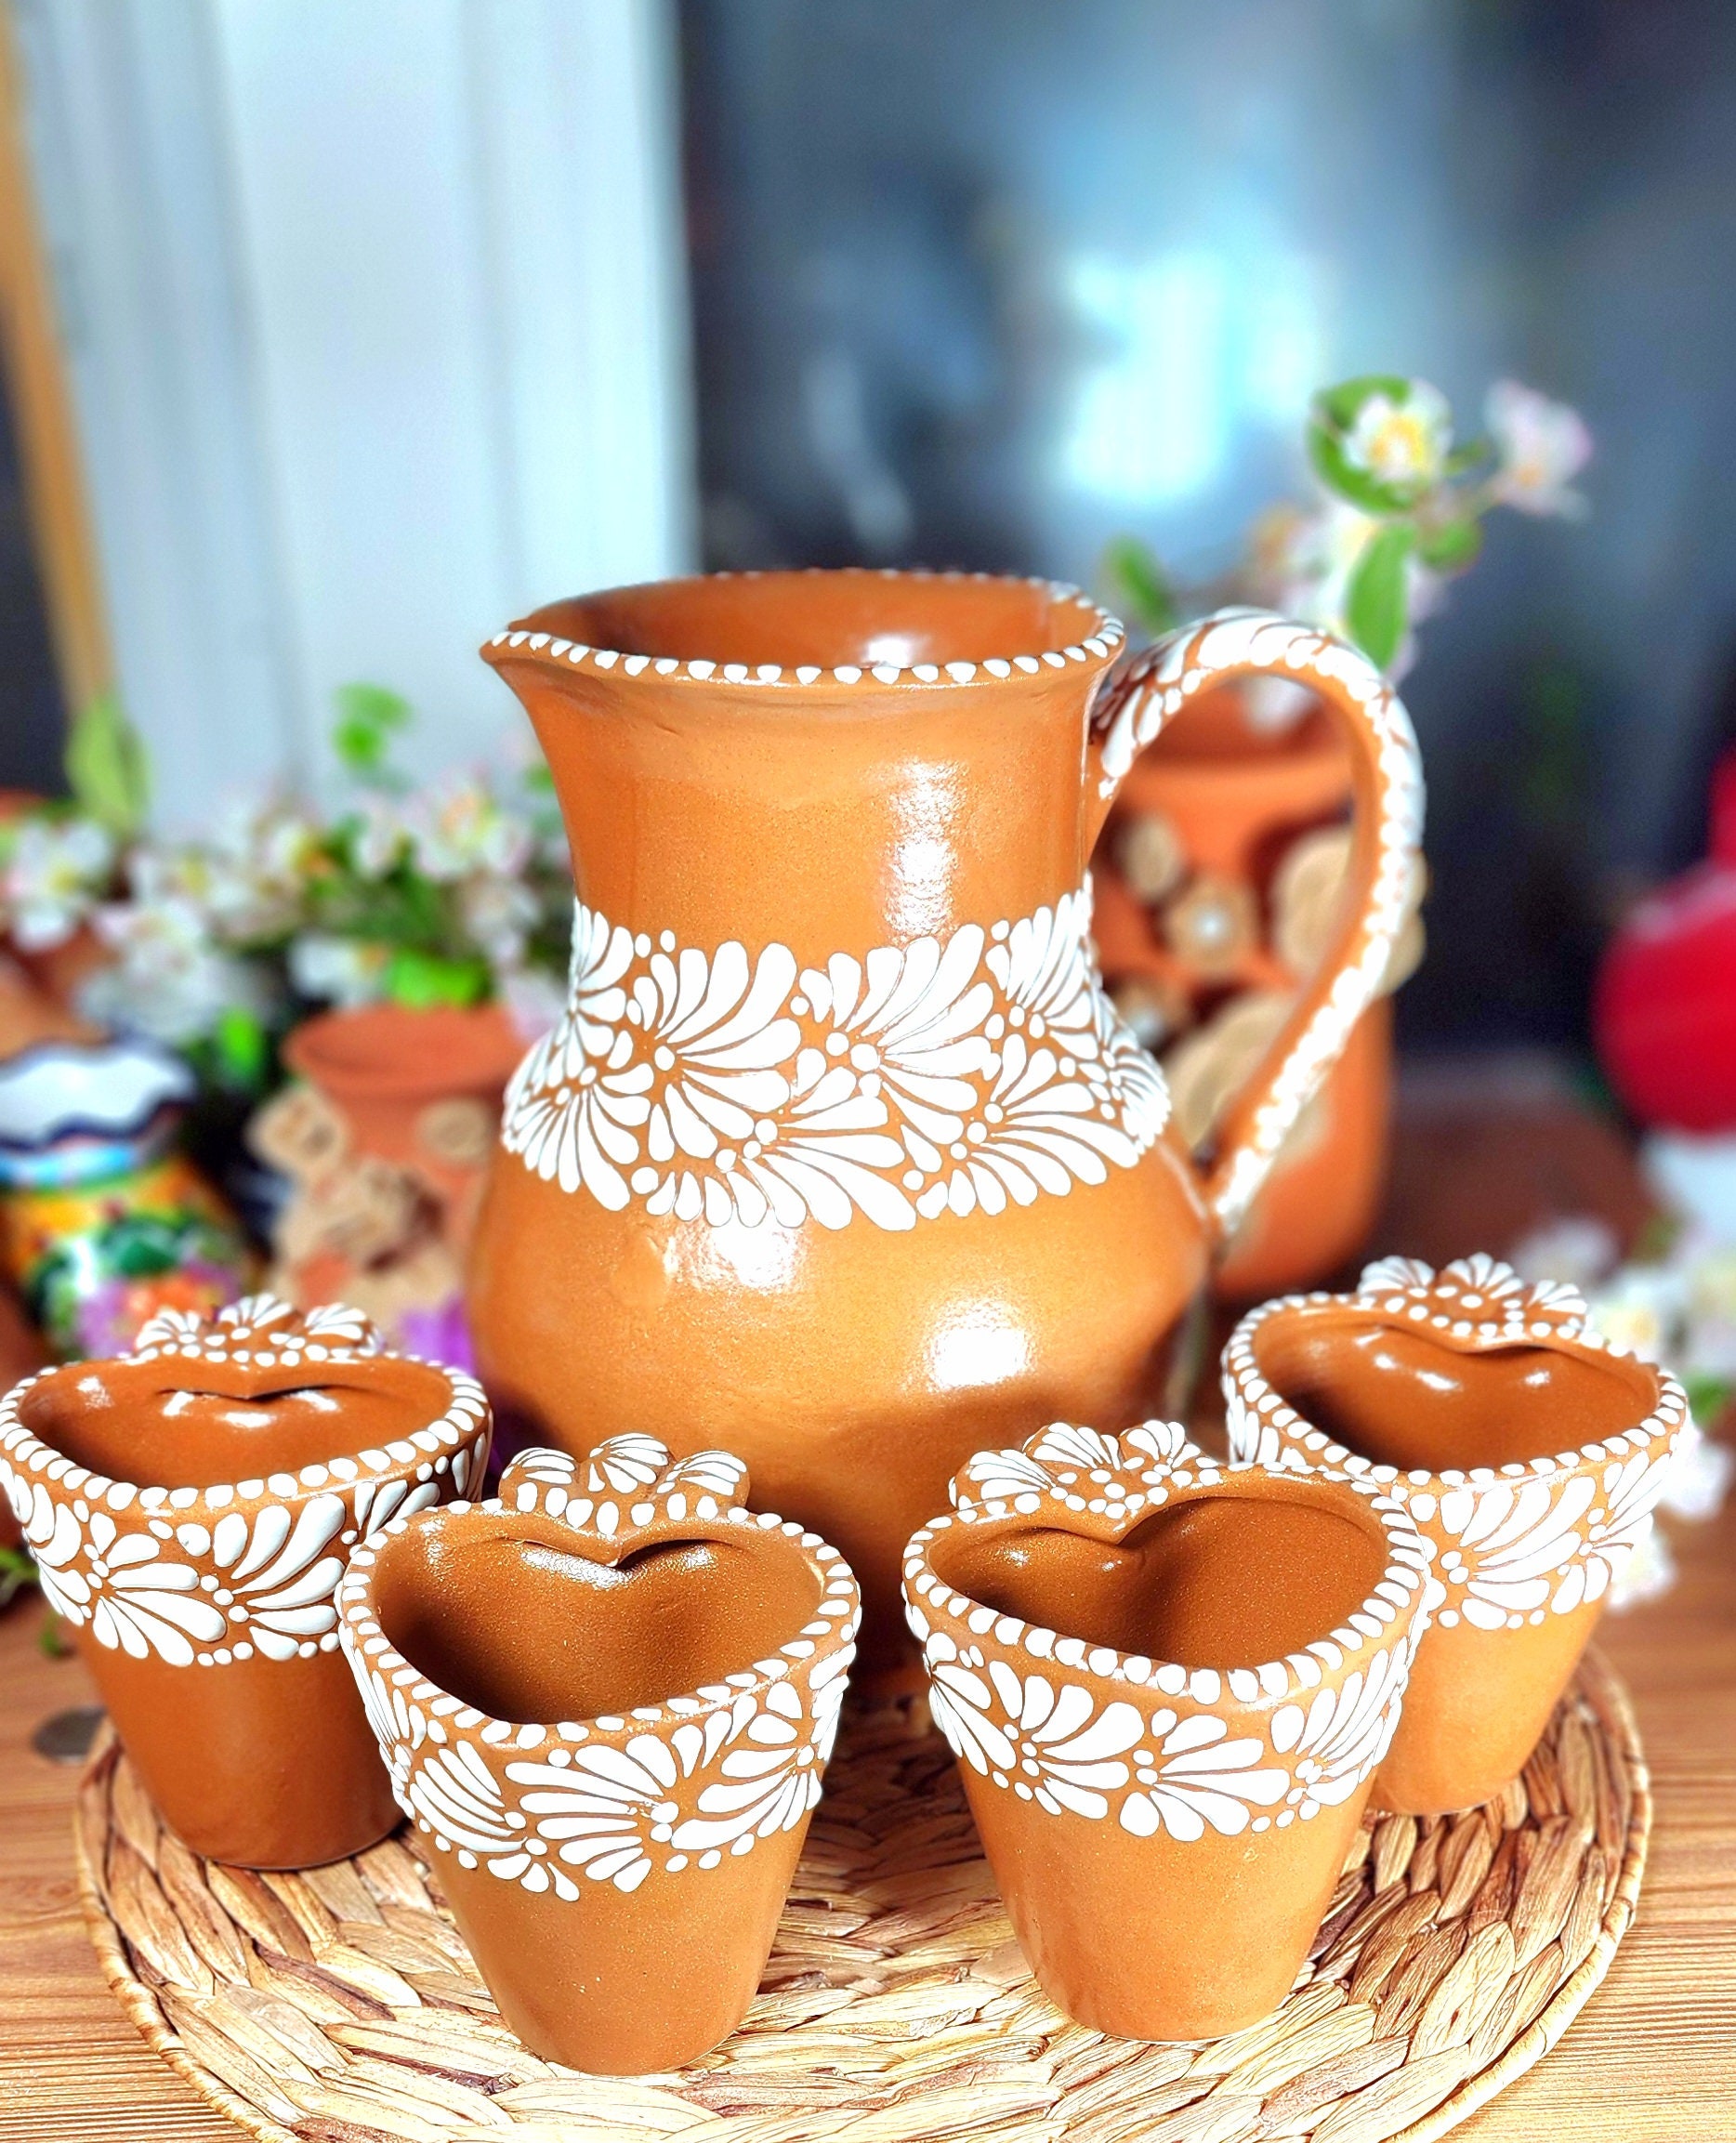 Terracotta Clay Planter Pots & Matching Saucers -- $12 Ea. / $30 for 3 -  household items - by owner - housewares sale